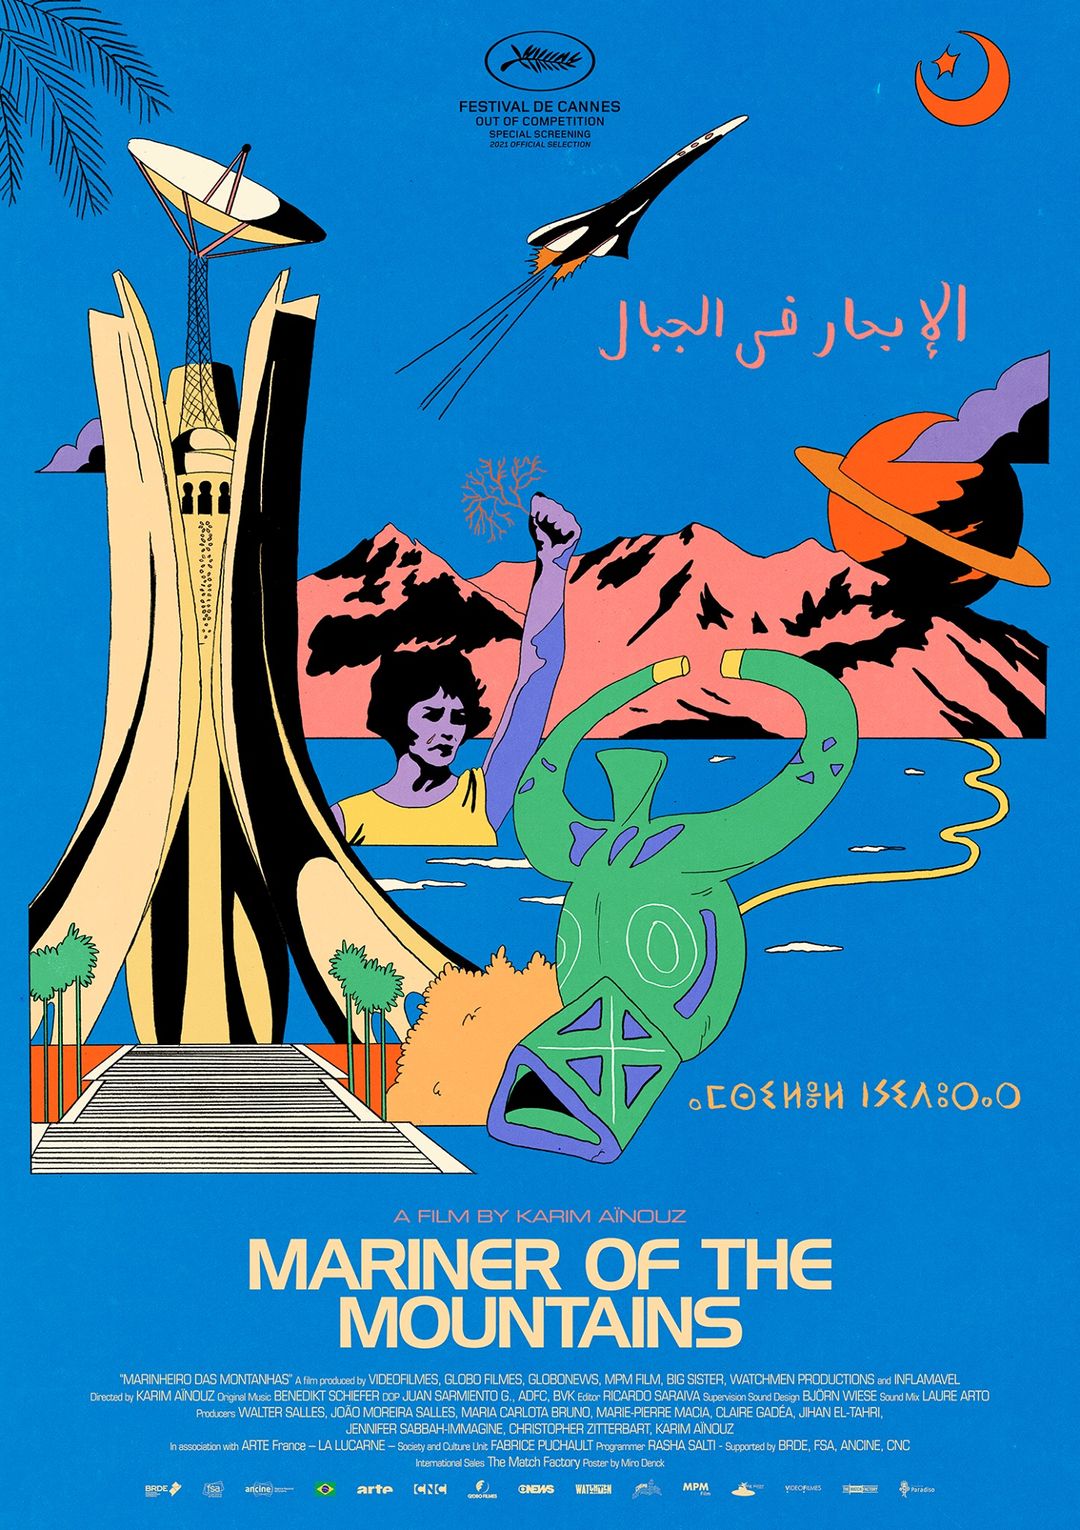 Mariner of the Mountains